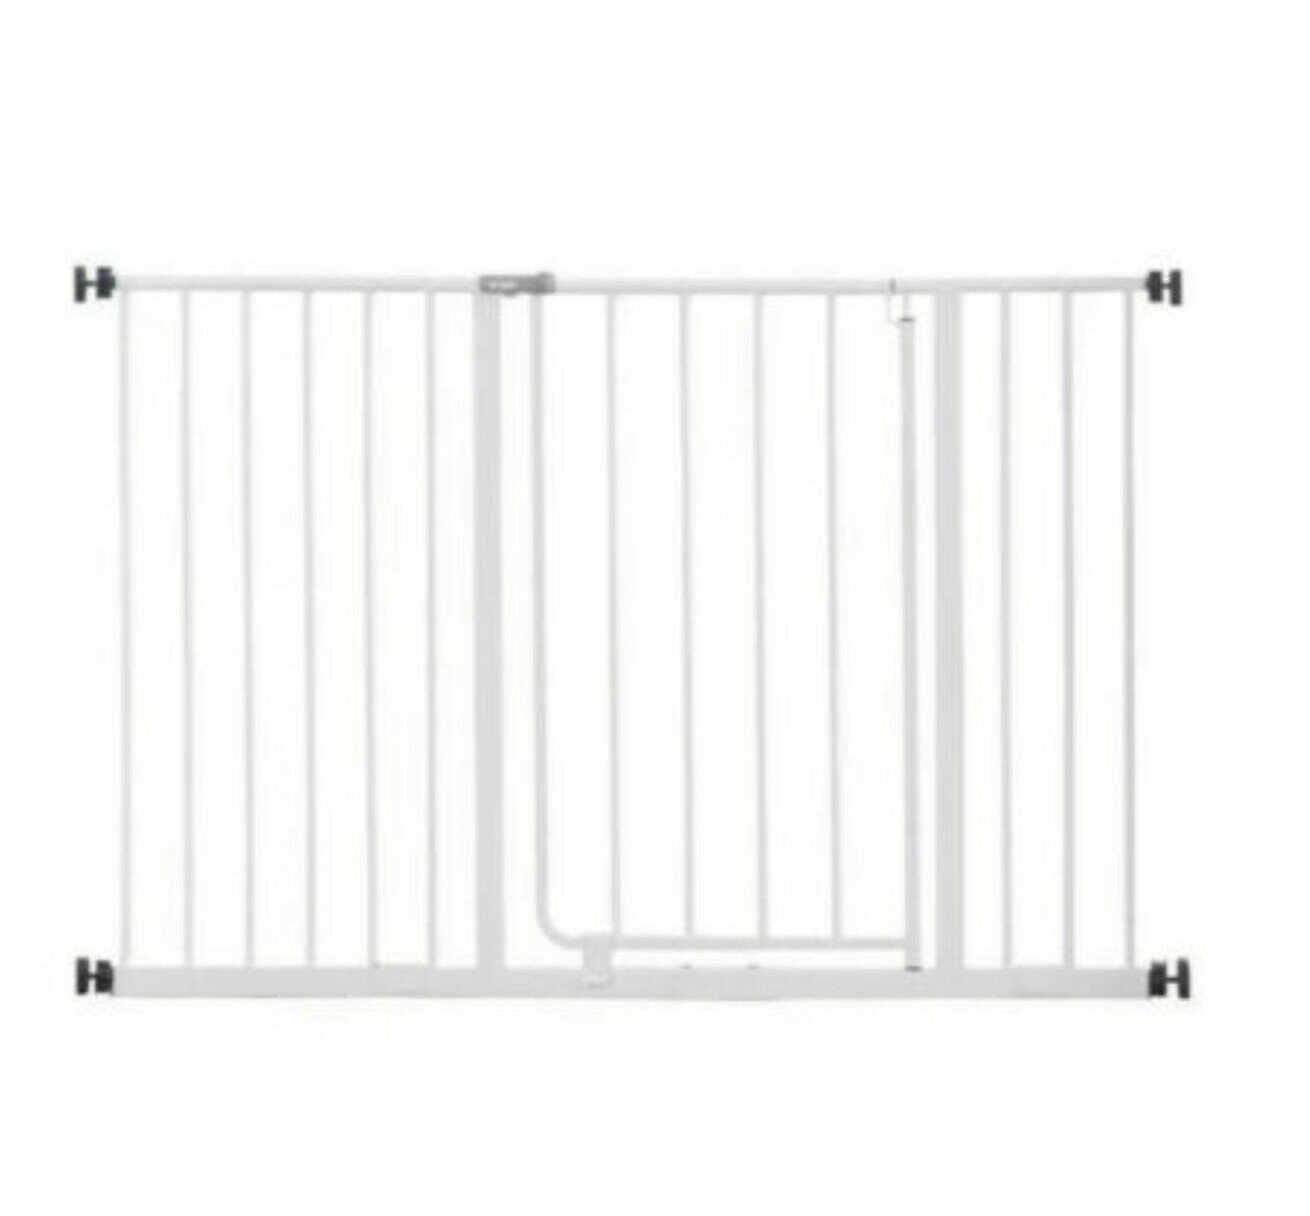 Regalo Easy Open Extra Wide Metal Walk Through Safety Gate White Model 1185DS